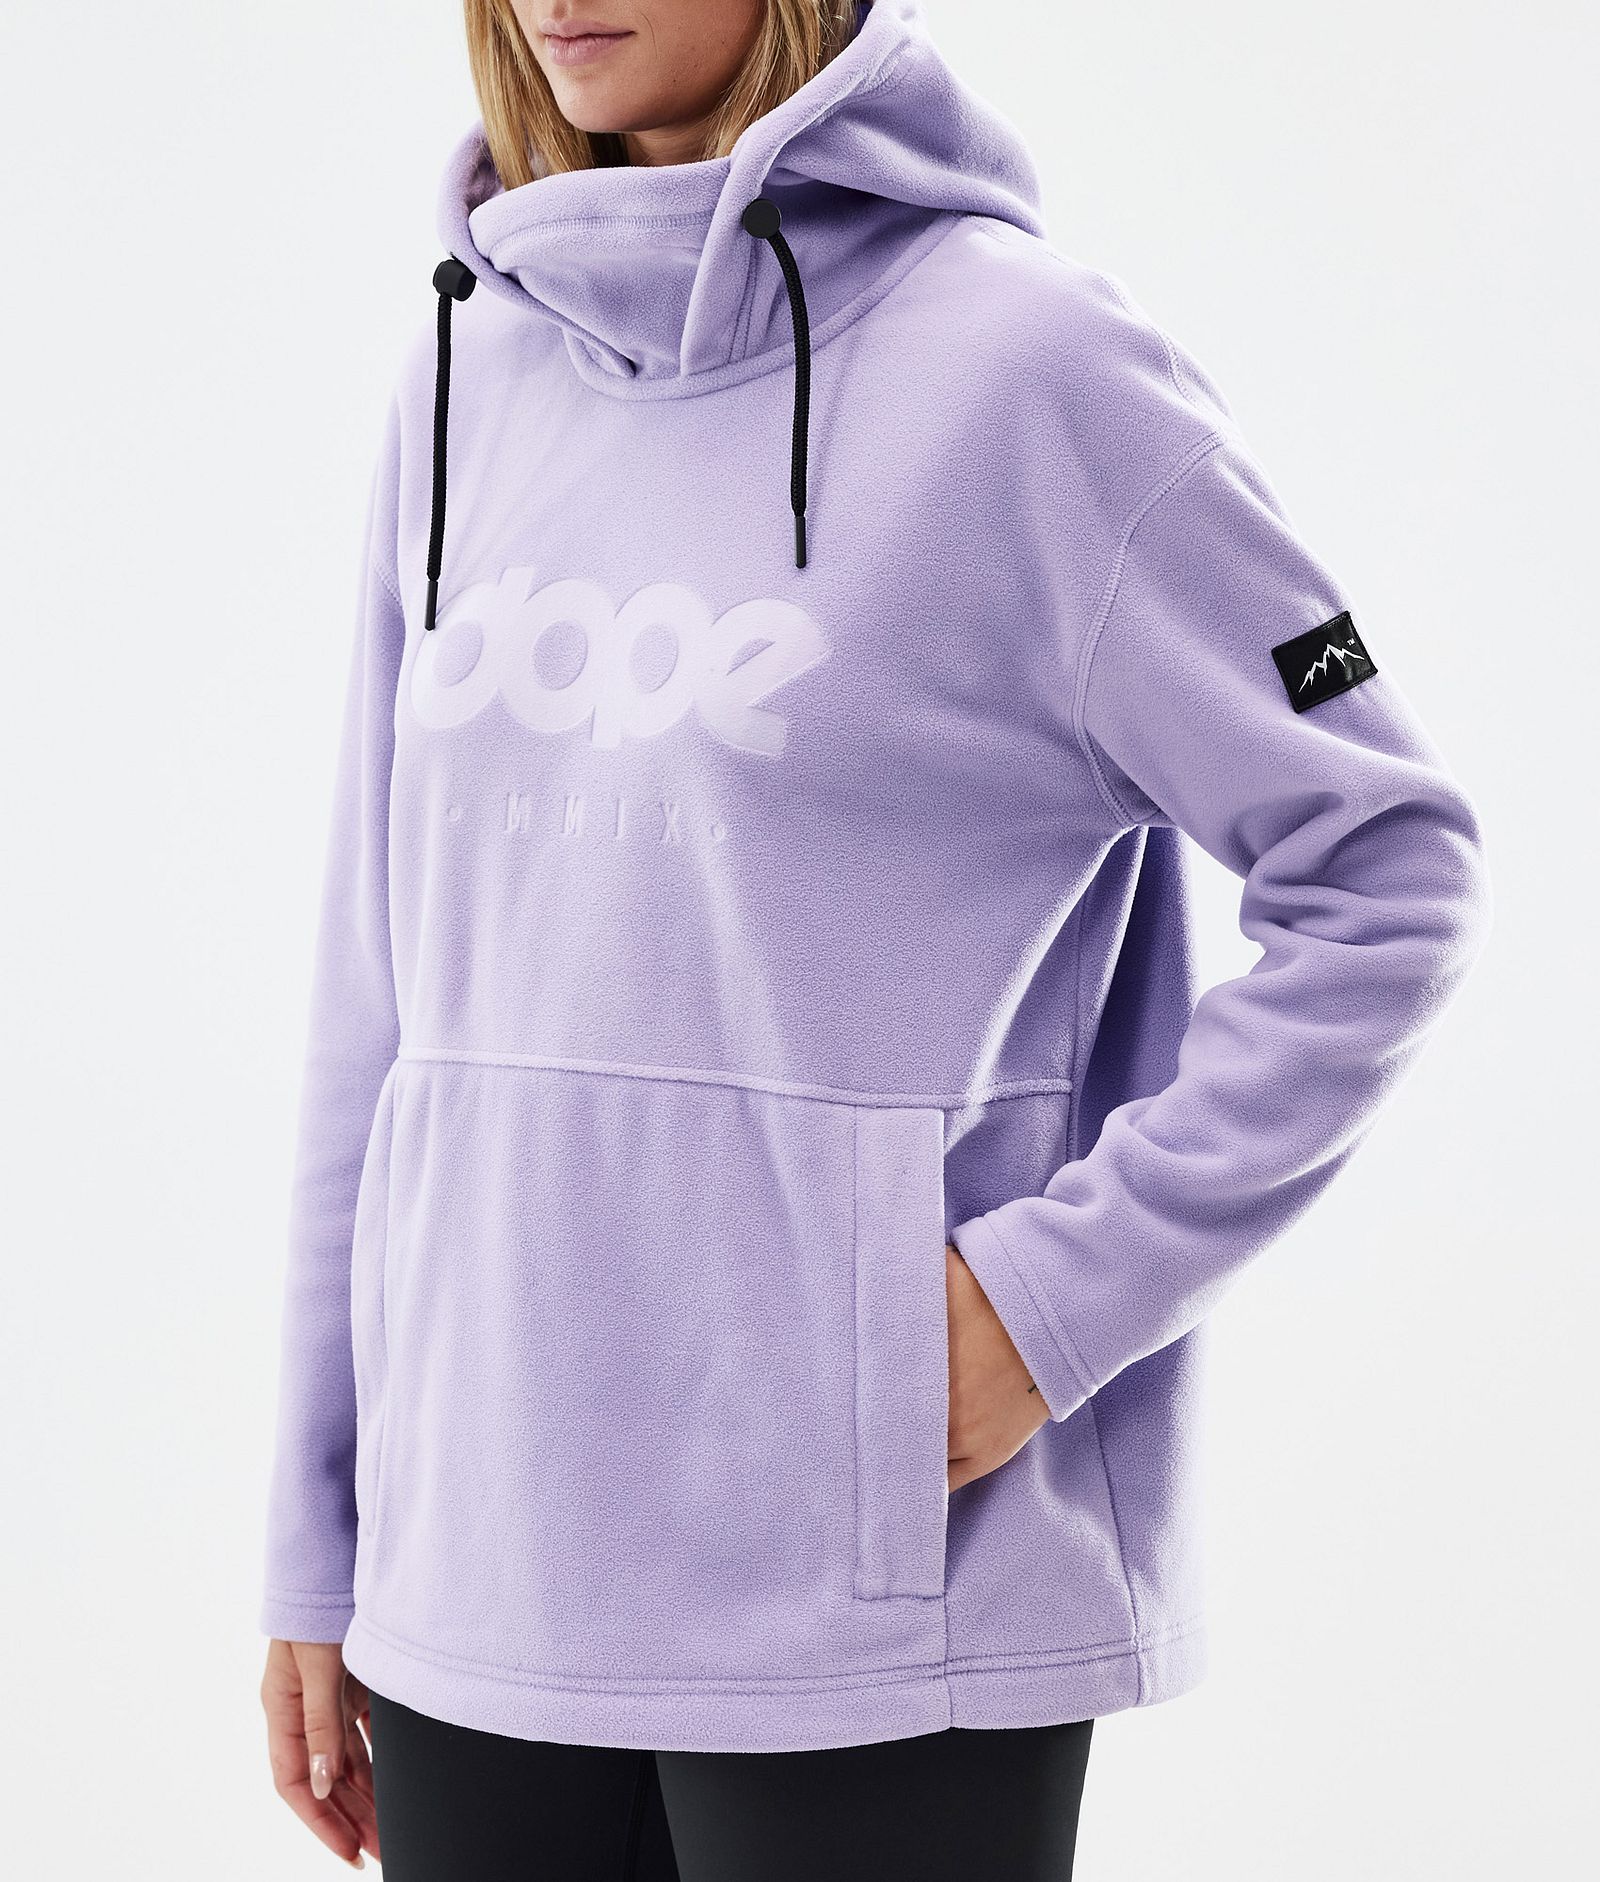 Dope Cozy II W Pull Polaire Femme Faded Violet Renewed, Image 7 sur 7